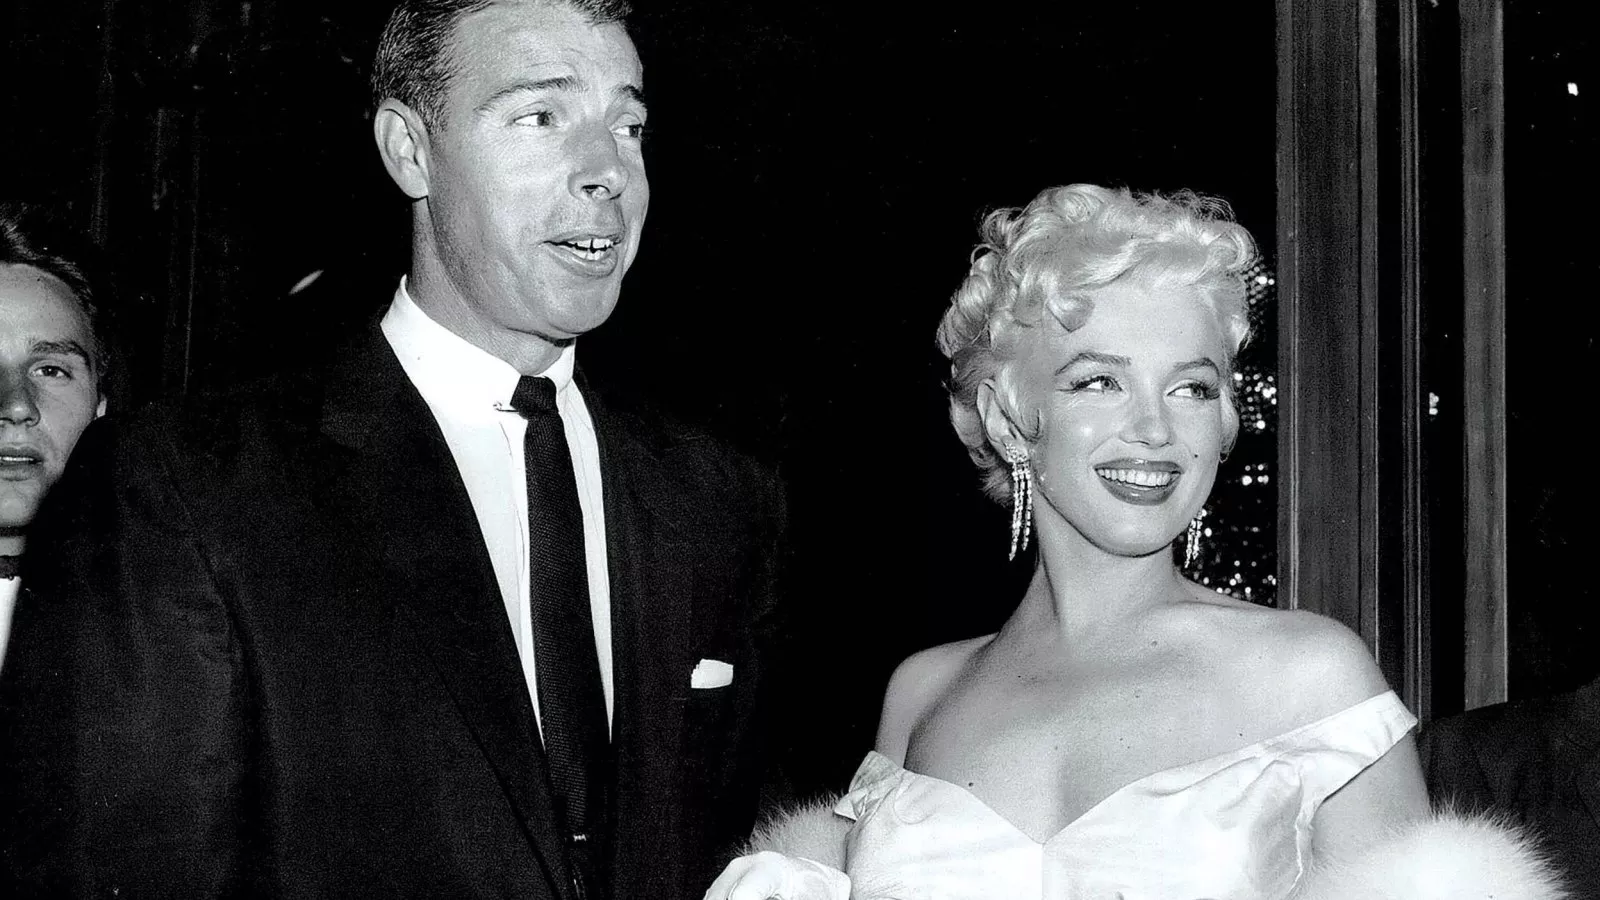 Marilyn Monroe, Bobby Kennedy Argued Just Before Her Death